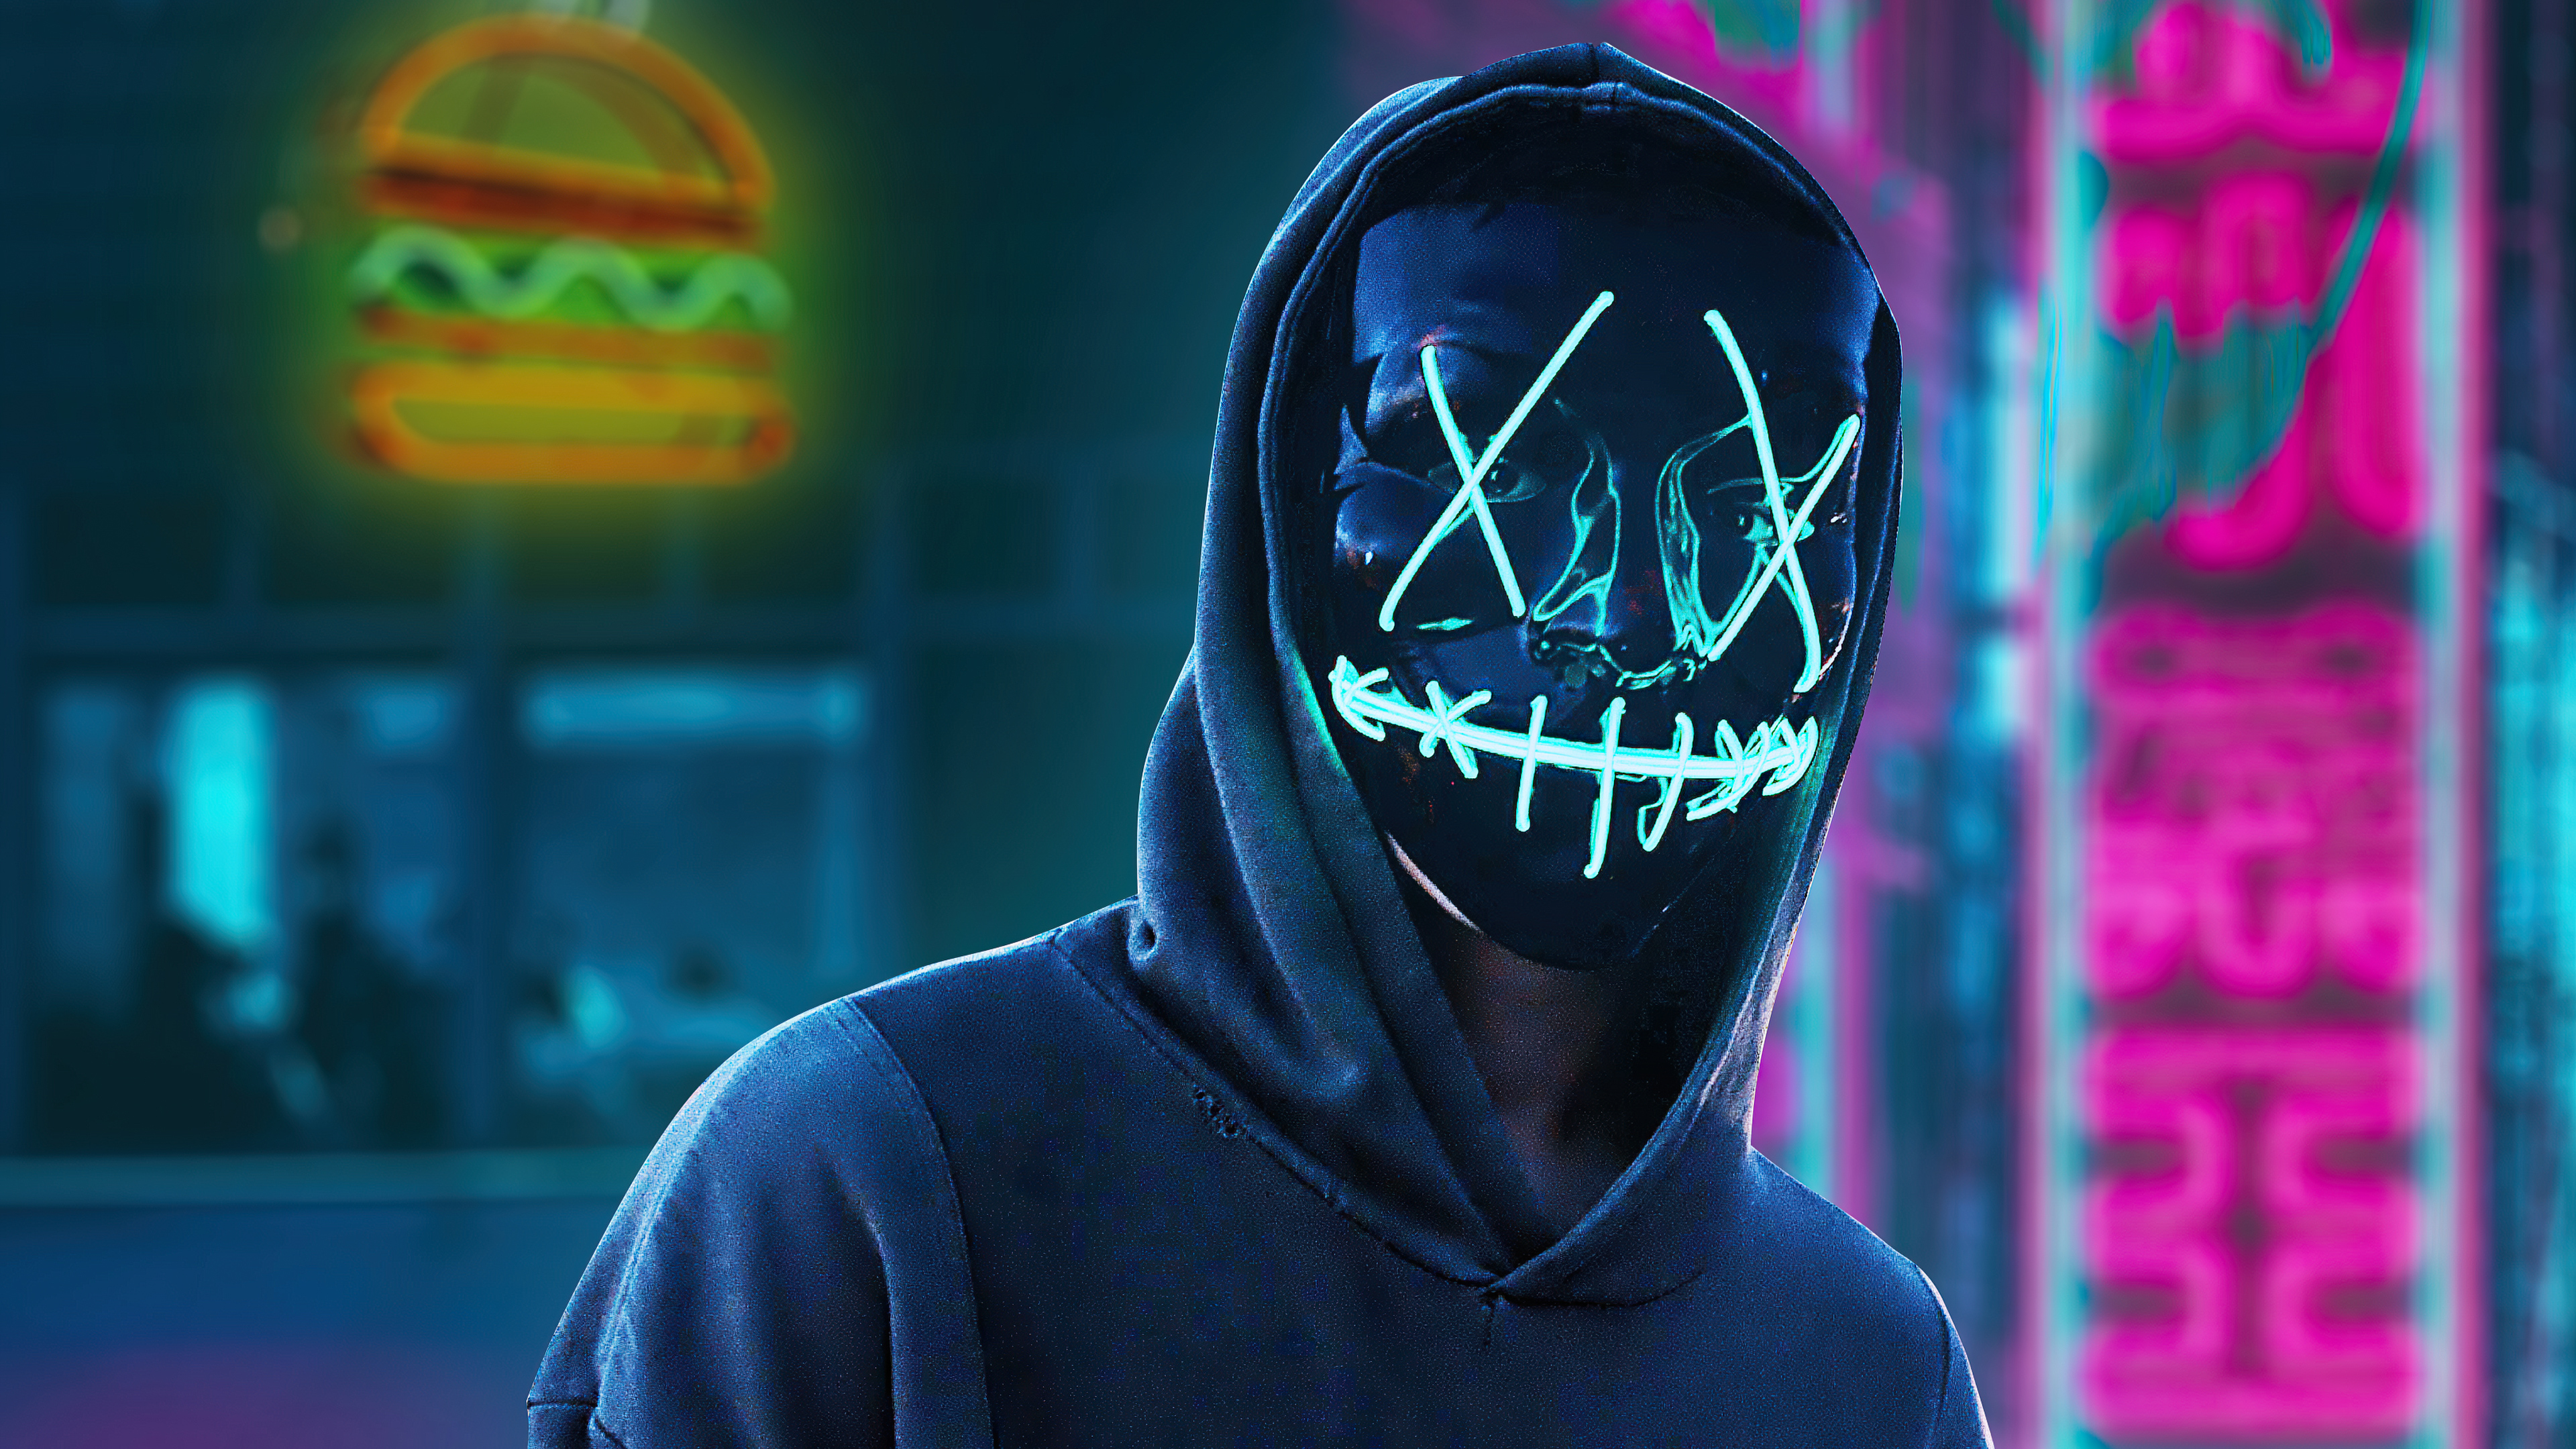 Black Mask Hoodie Boy In City 4k, HD Artist, 4k Wallpapers, Images,  Backgrounds, Photos and Pictures